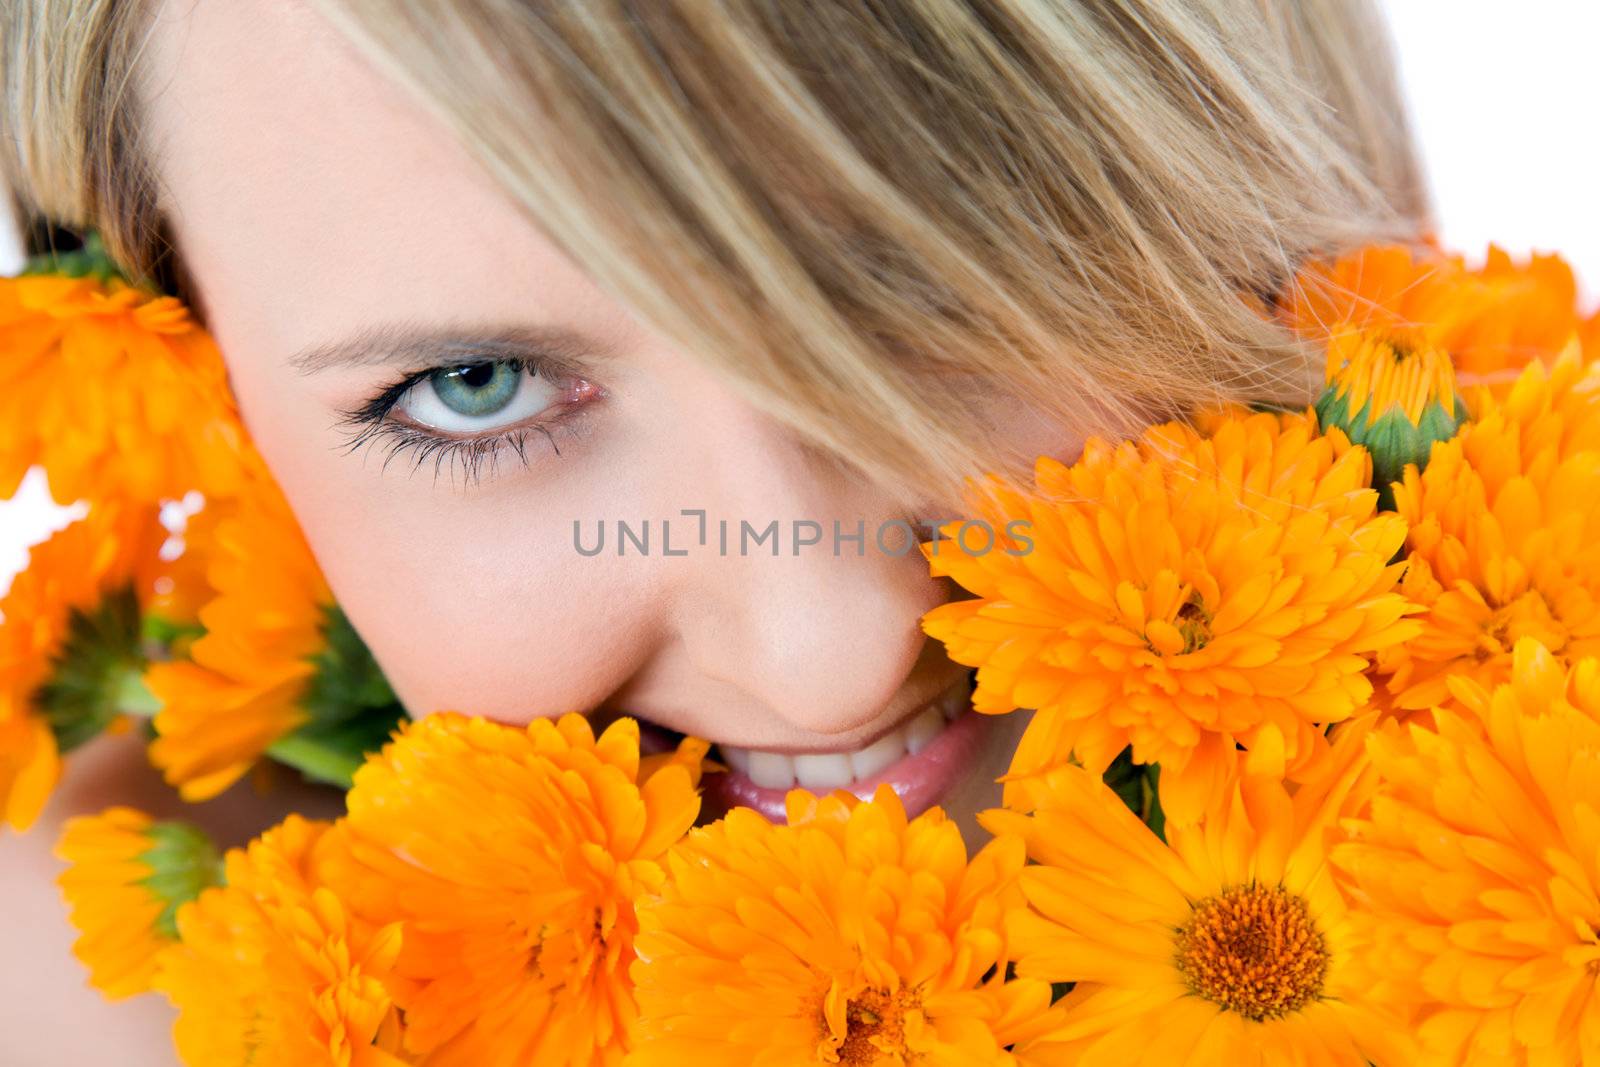 Close-up of beautiful female face holding marigolds, colourfull eye looking at camera